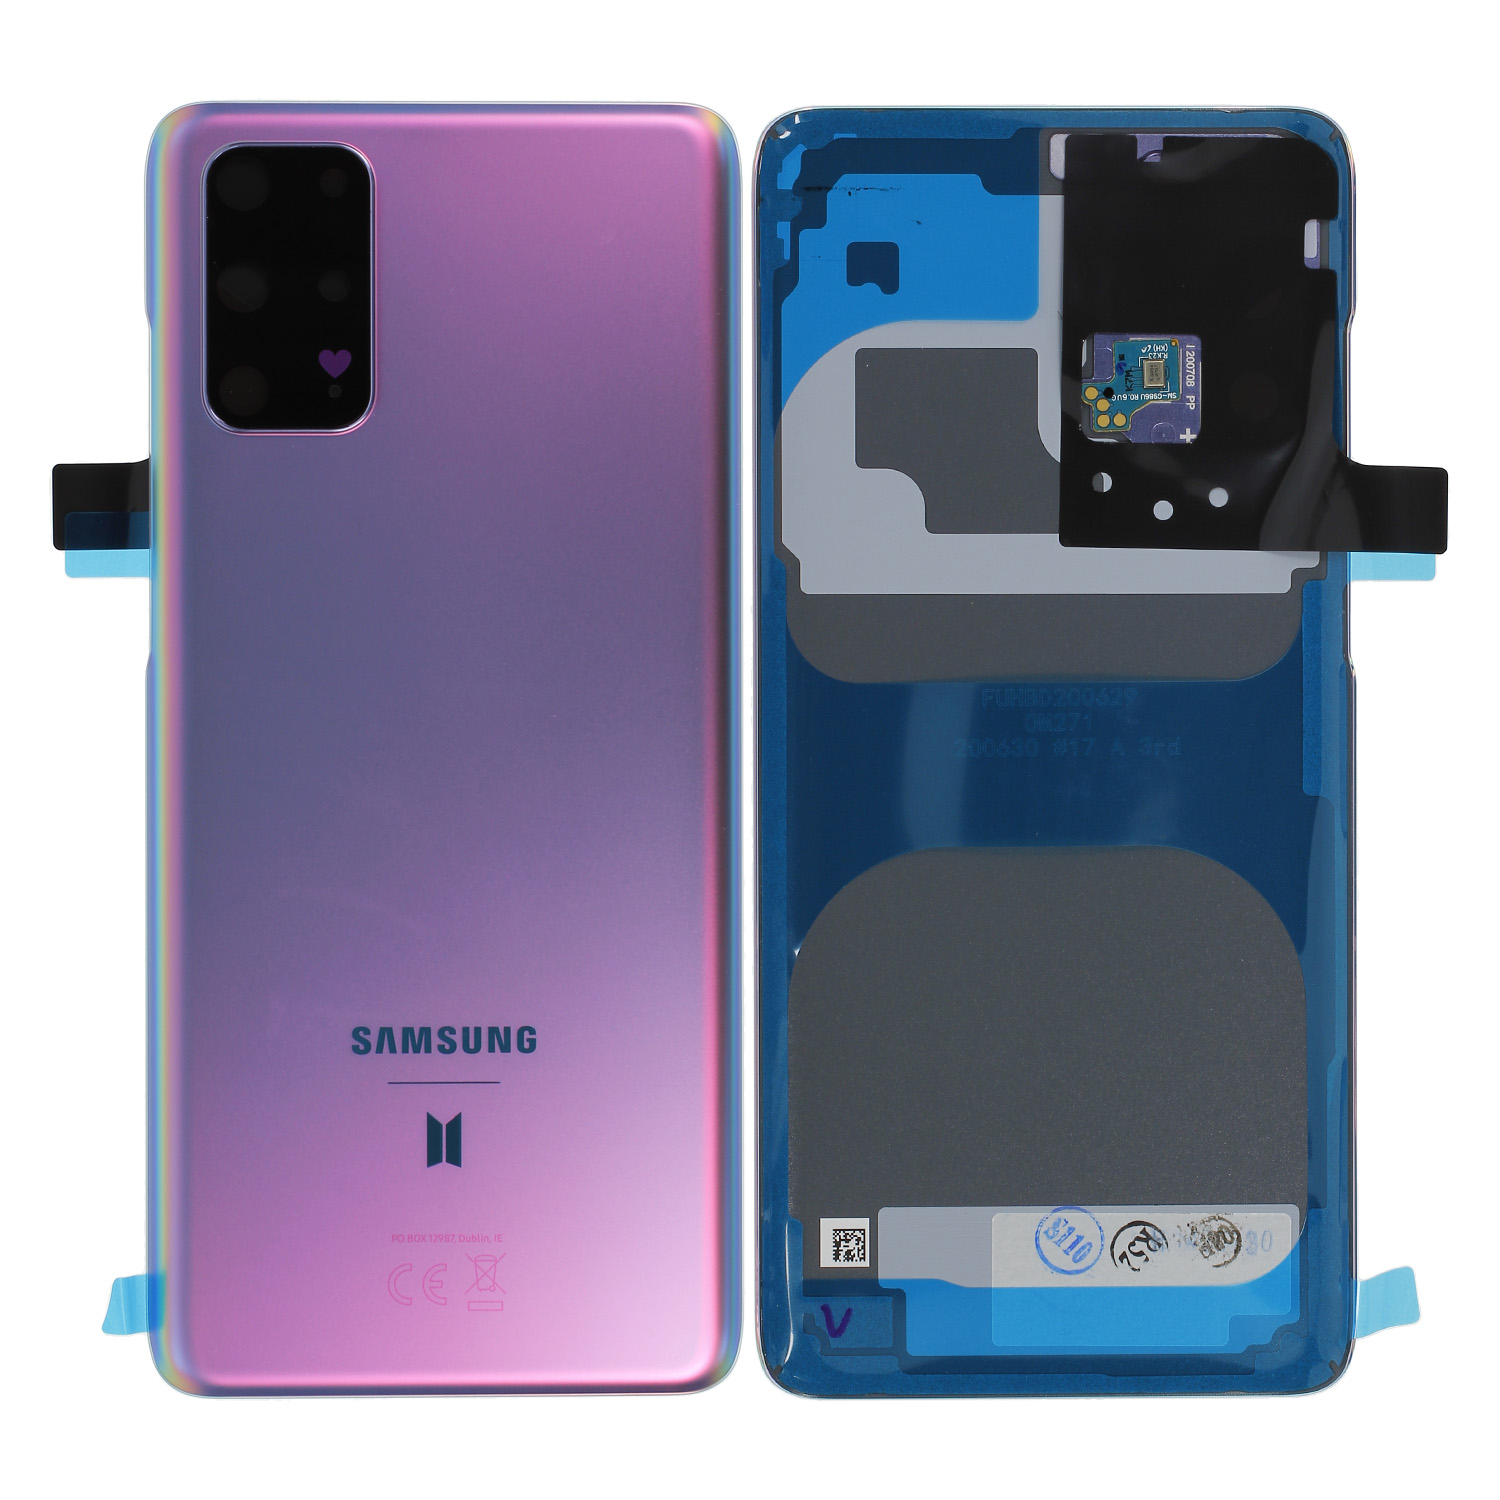 Samsung Galaxy S20+ G985F / S20+ 5G G986B Battery Cover, BTS Edition Purple, Service Pack